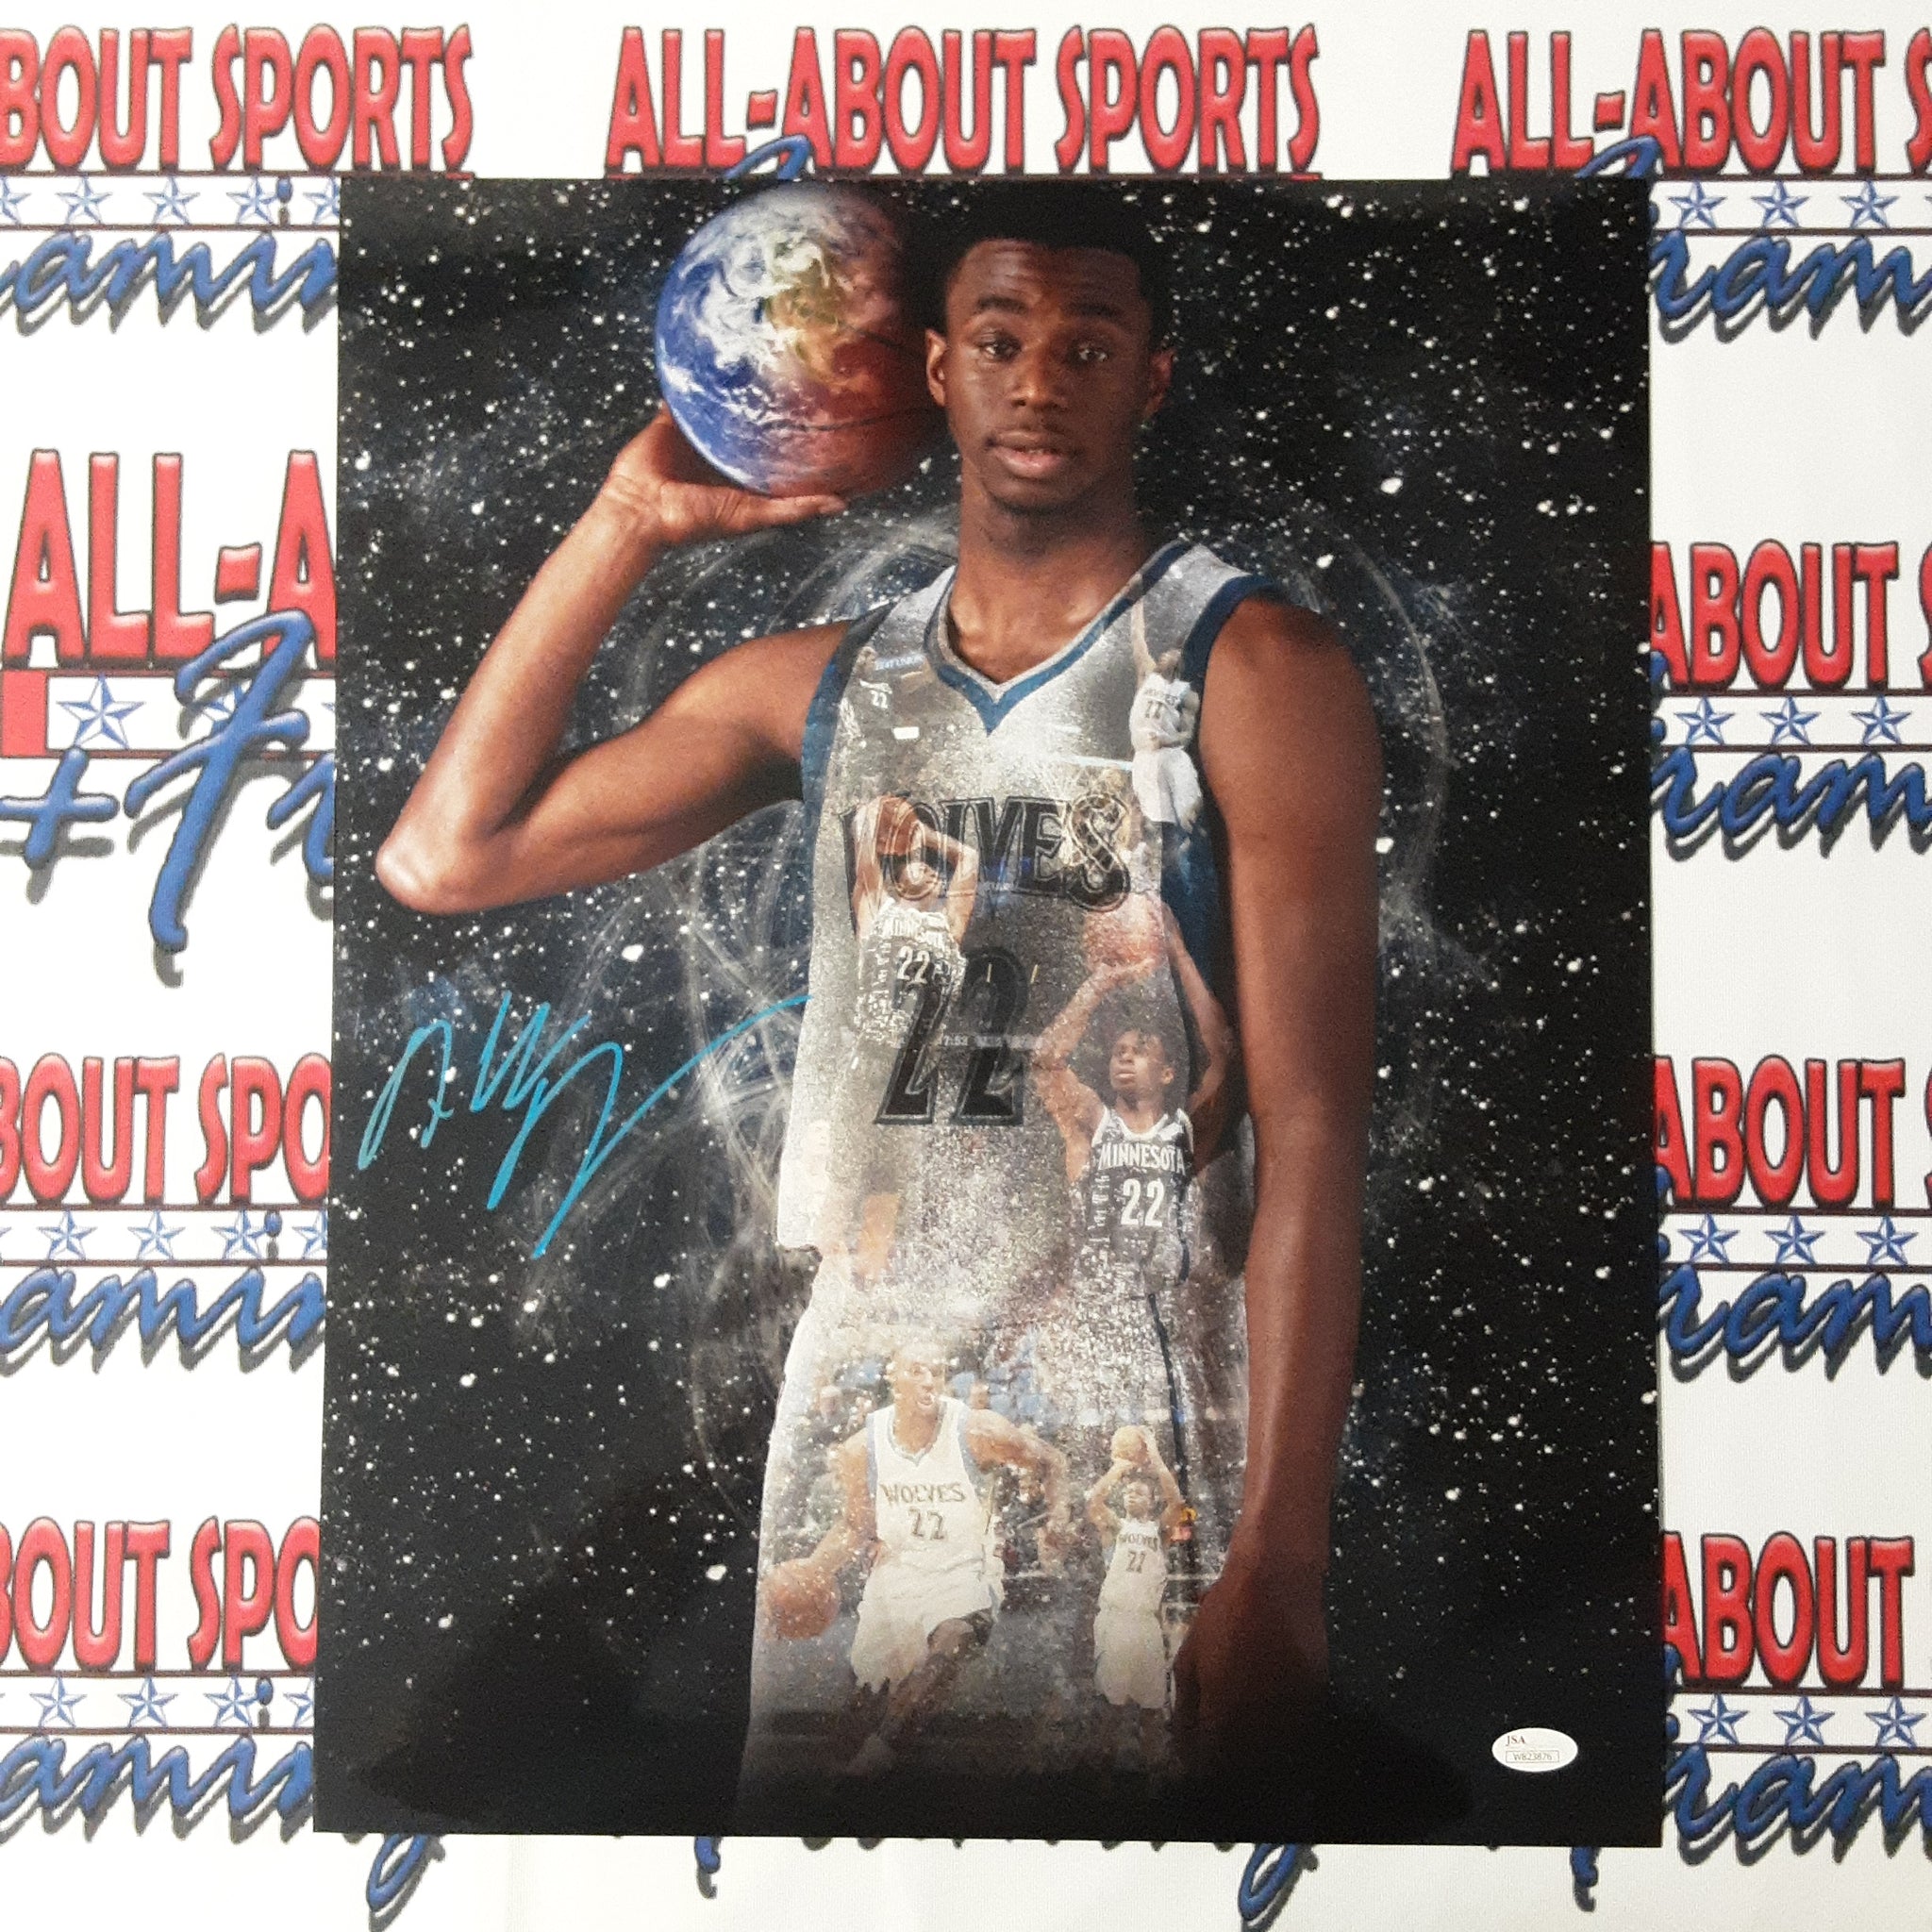 Andrew Wiggins Authentic Signed 16x20 Photo Autographed JSA